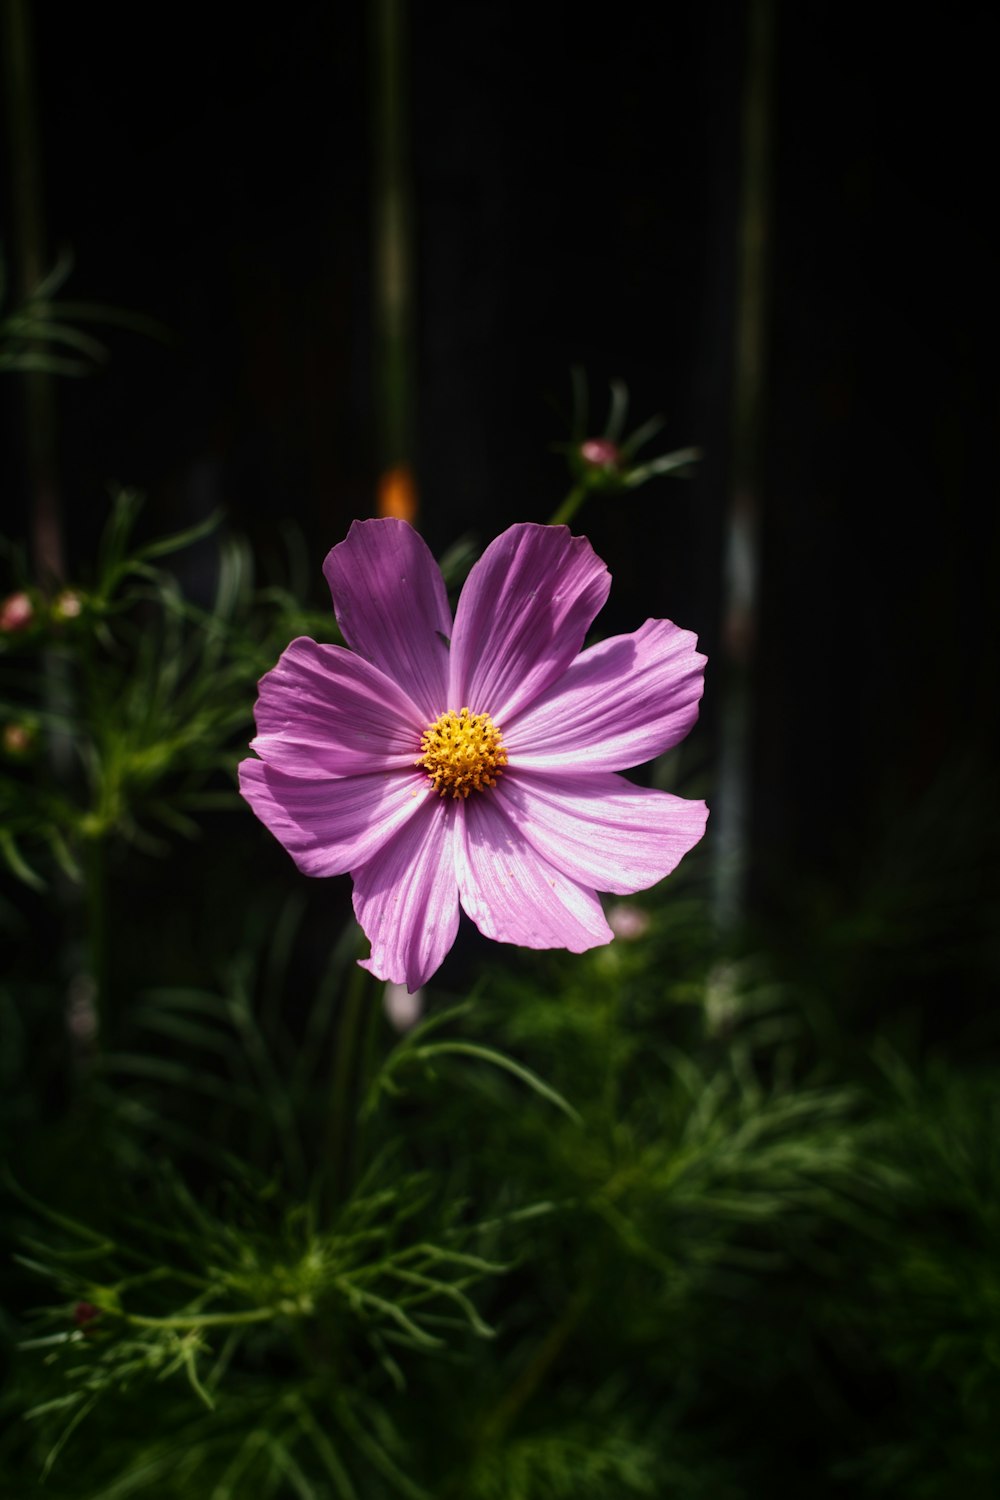 a purple flower with a yellow center on a dark background